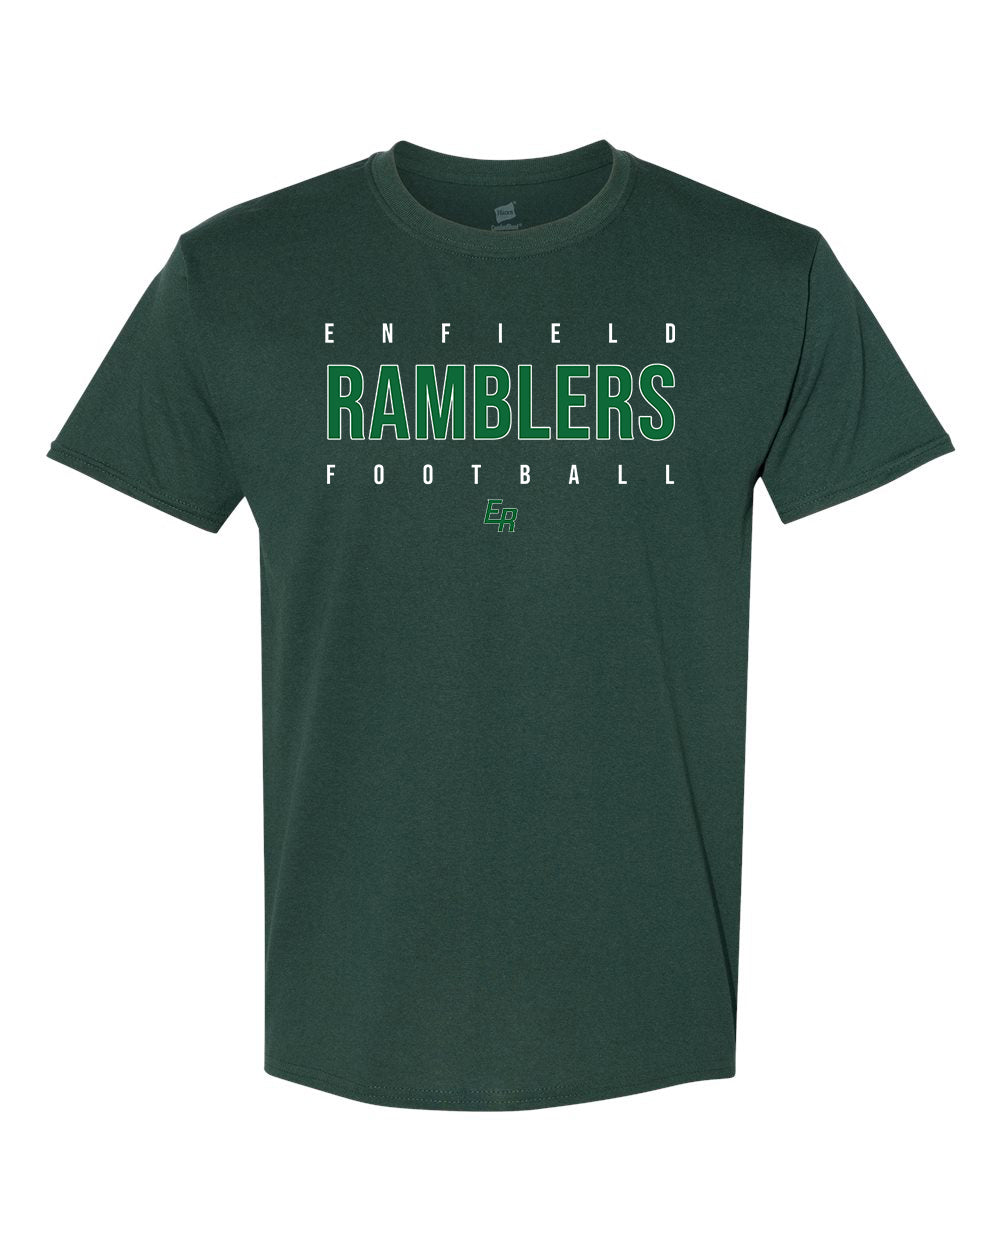 Ramblers Youth T-Shirt 50/50 Blend "ERF" - 29BR (color options available)